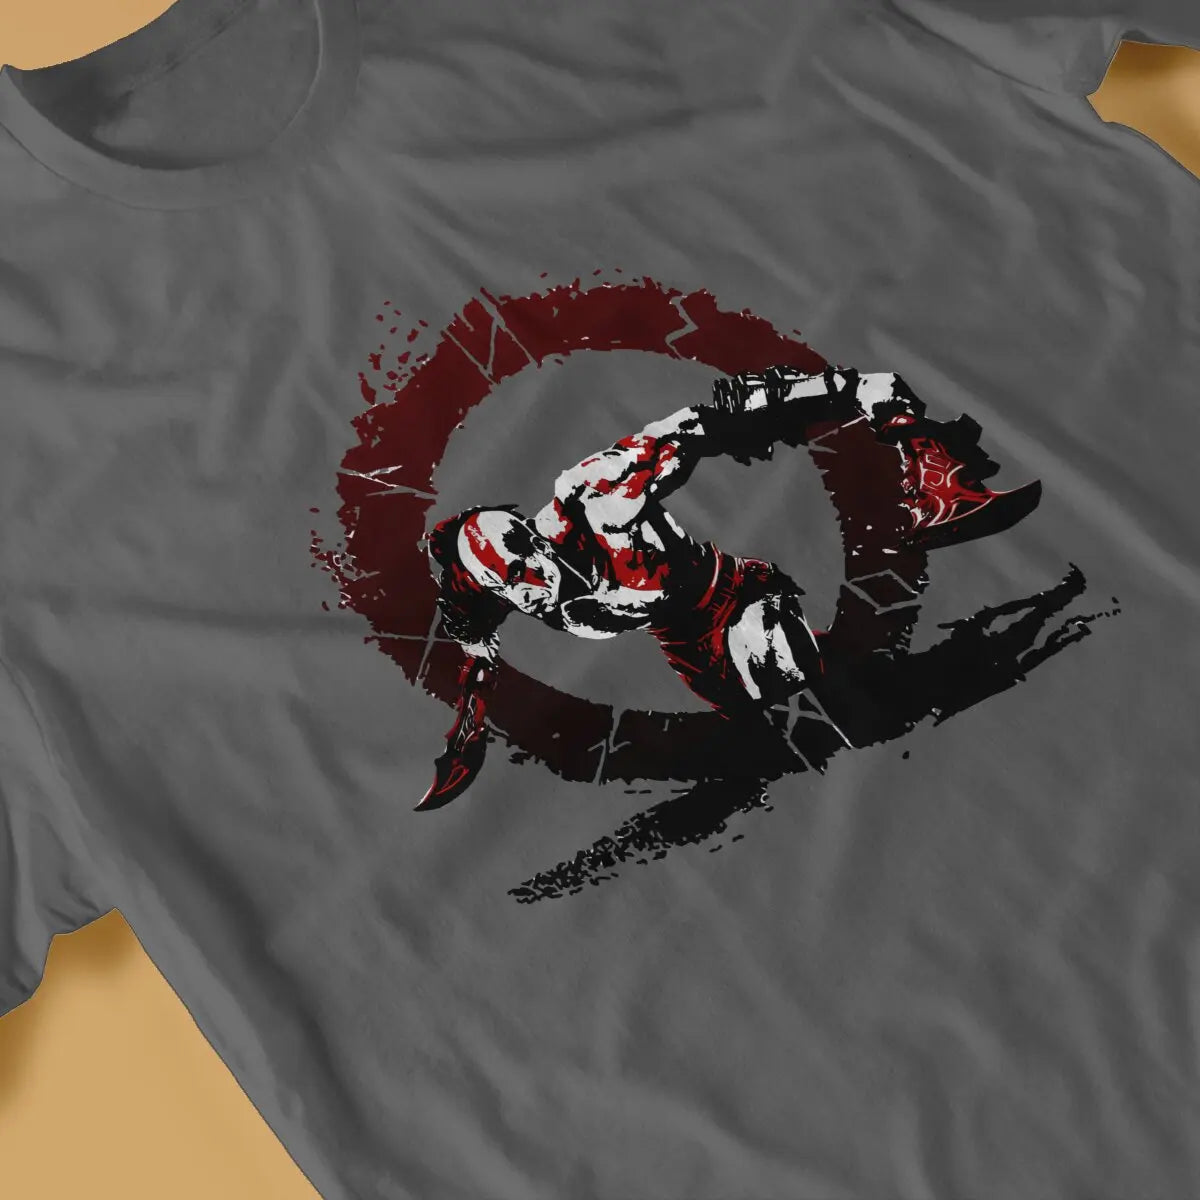 God Of War Kratos TShirt - Available at 2Fast2See.co